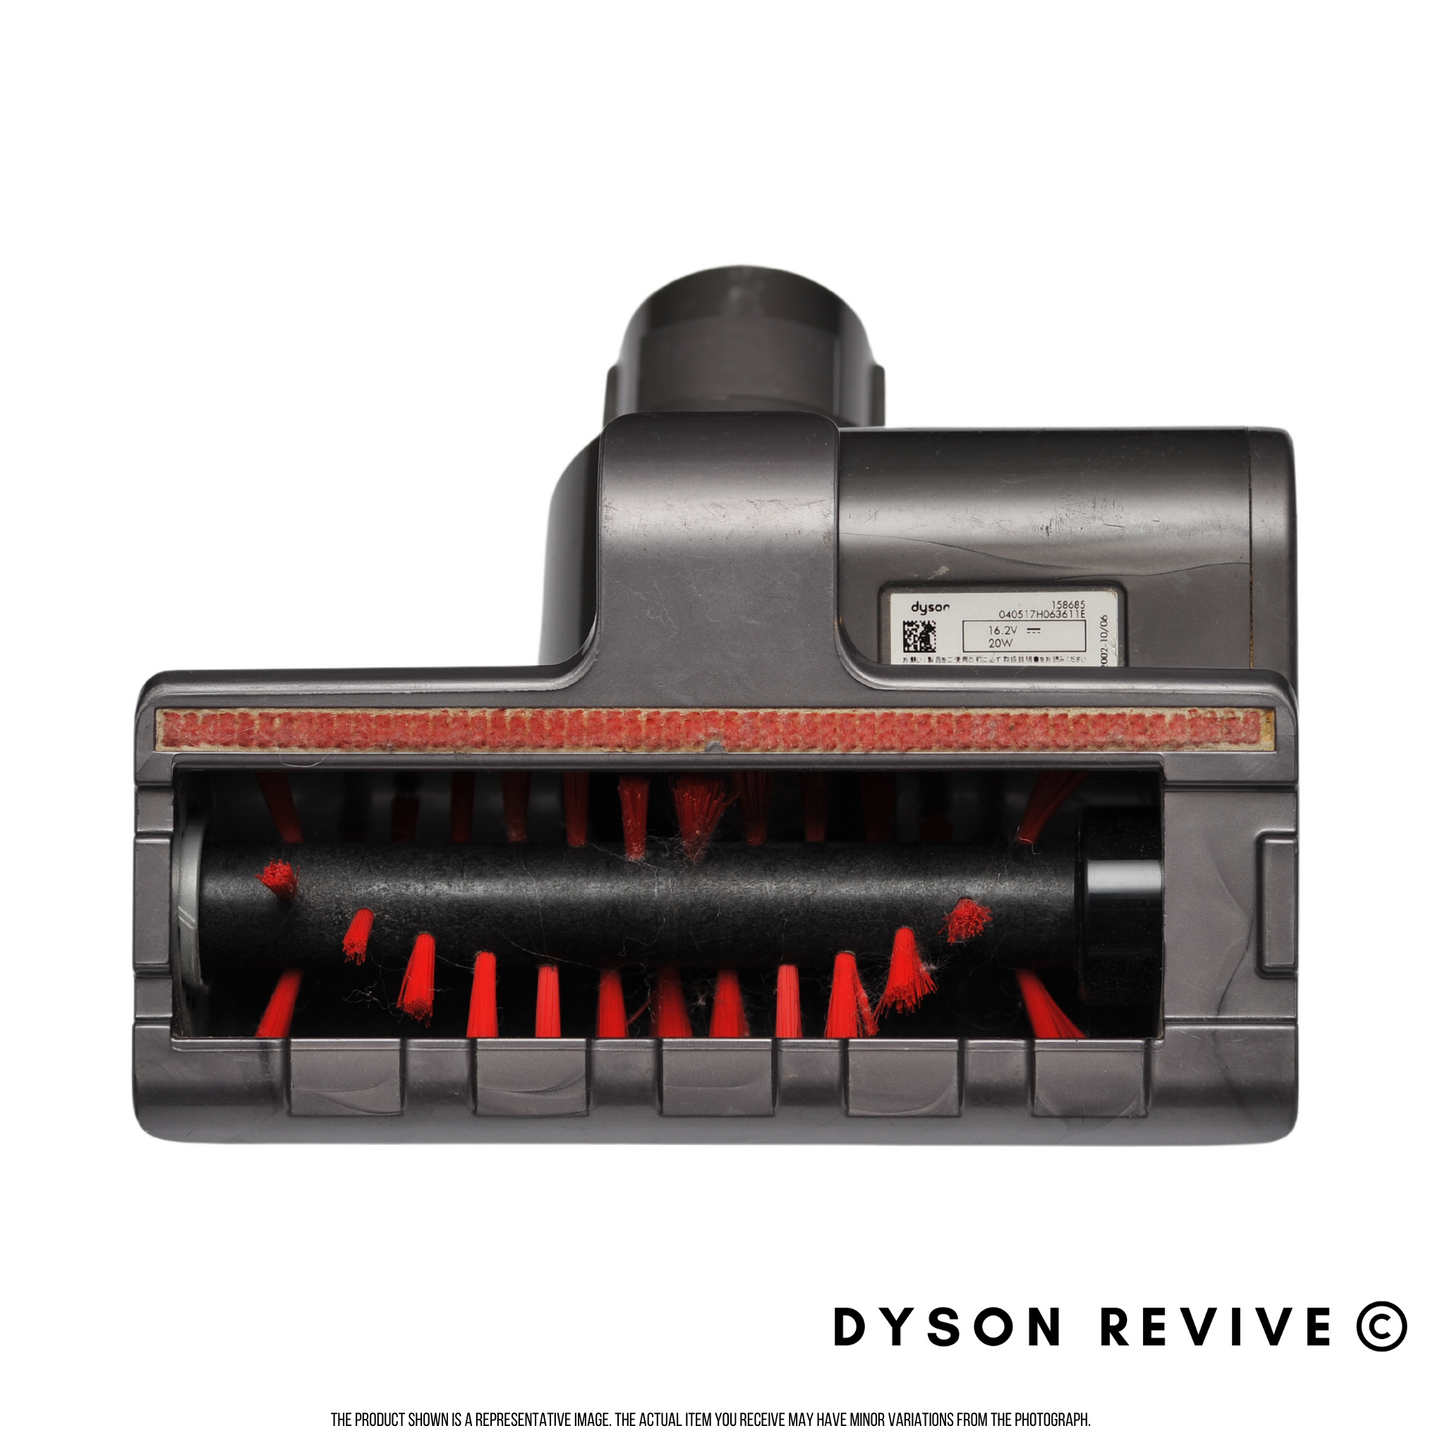 Genuine Dyson Refurbished Mini Motorised Tool Brush Compatible with Dyson V6 - Dyson Revive